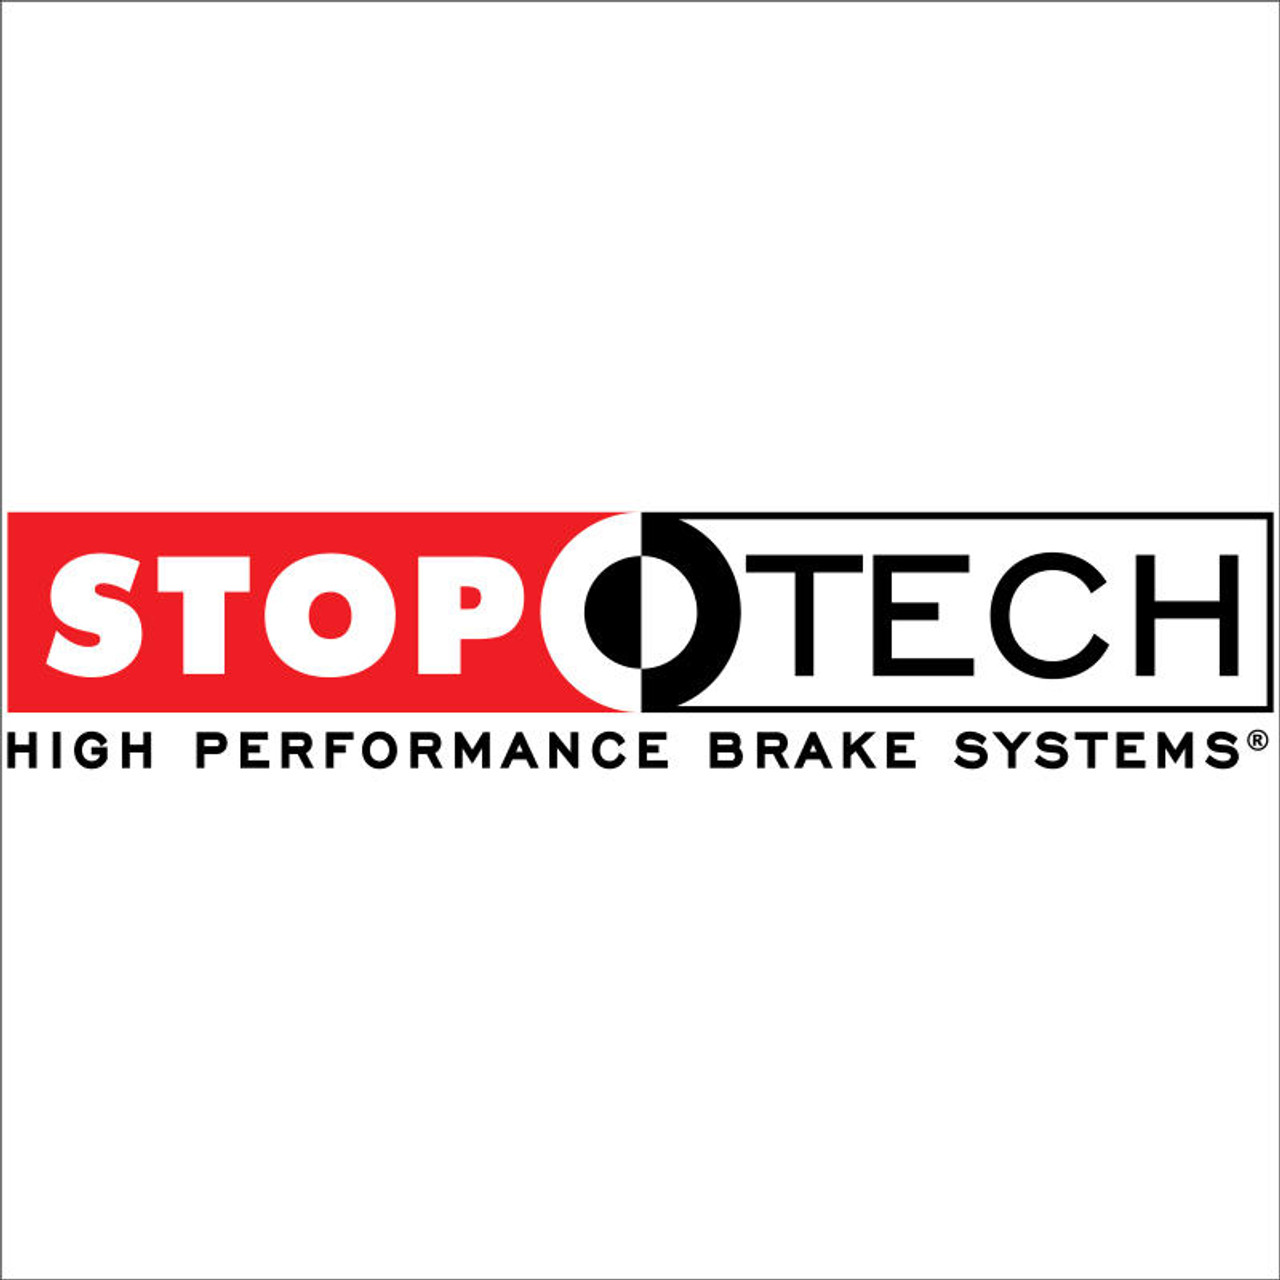 Stoptech StopTech 2004 VW Golf 3.2L R32 Front BBK w/ Zinc Slotted Rotors Black Calipers - 83.890.4700.53